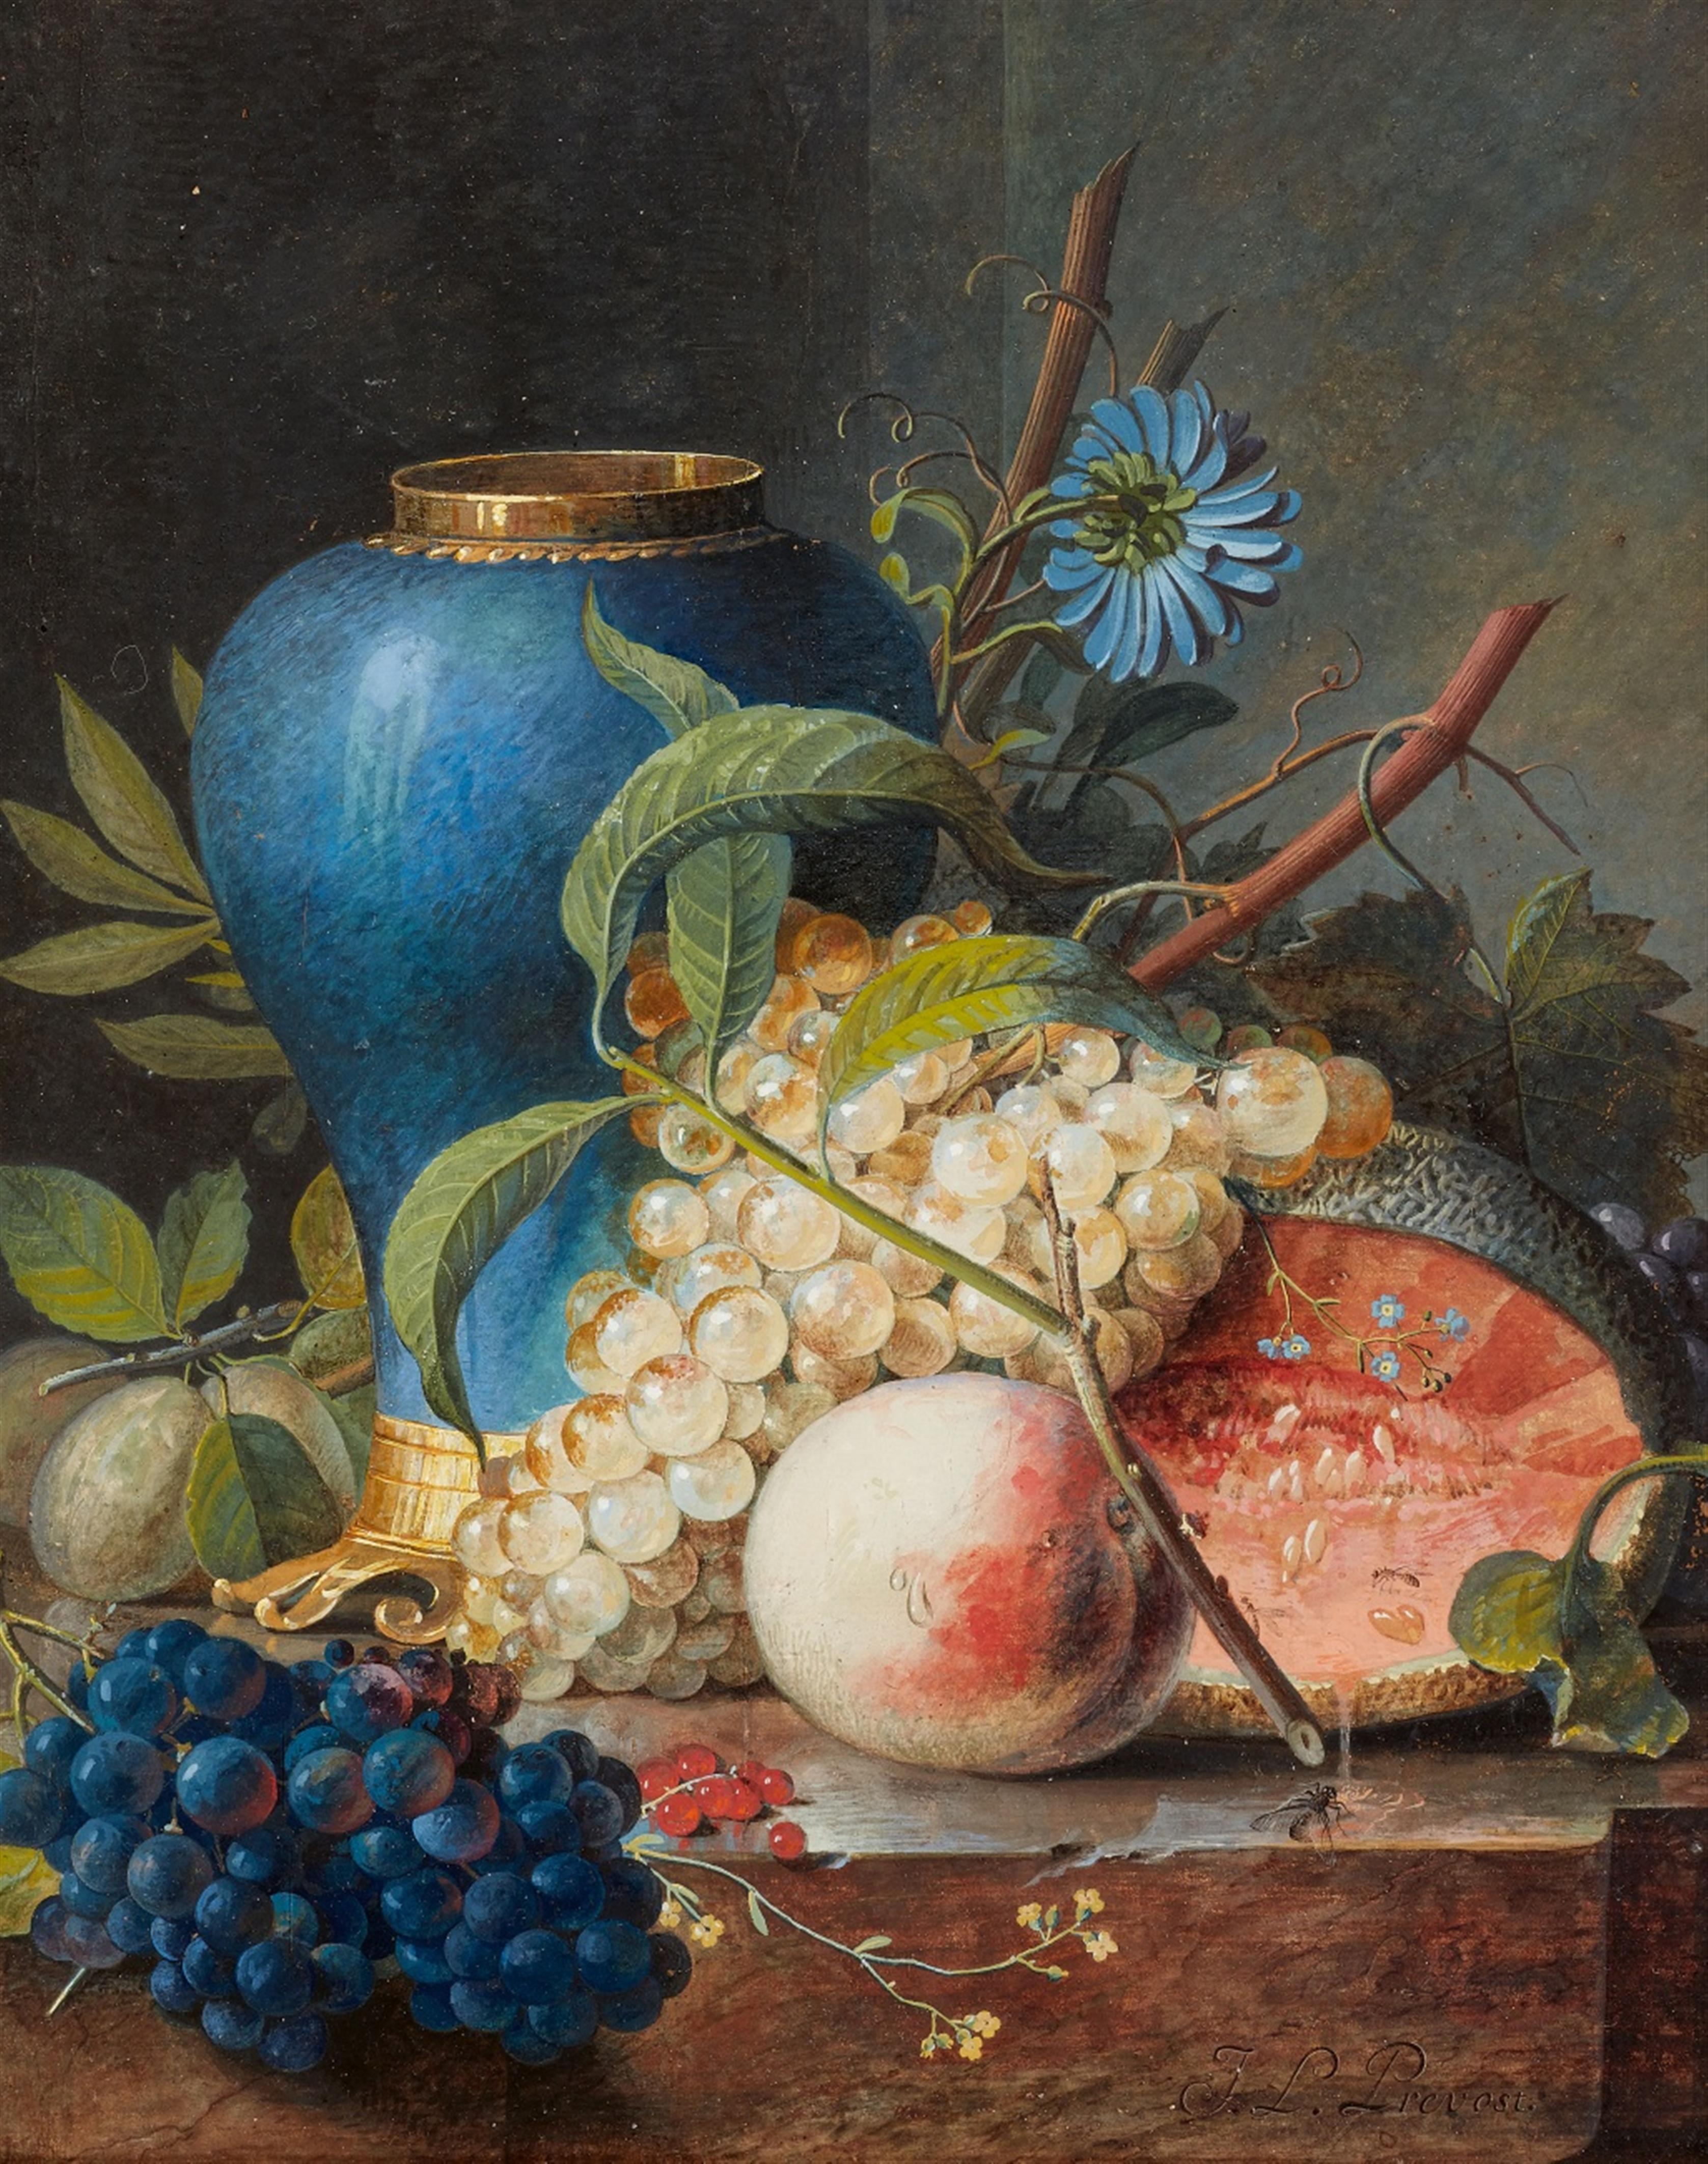 Jean-Louis Prevost - Still Life with Fruit and a Blue Vase - image-1